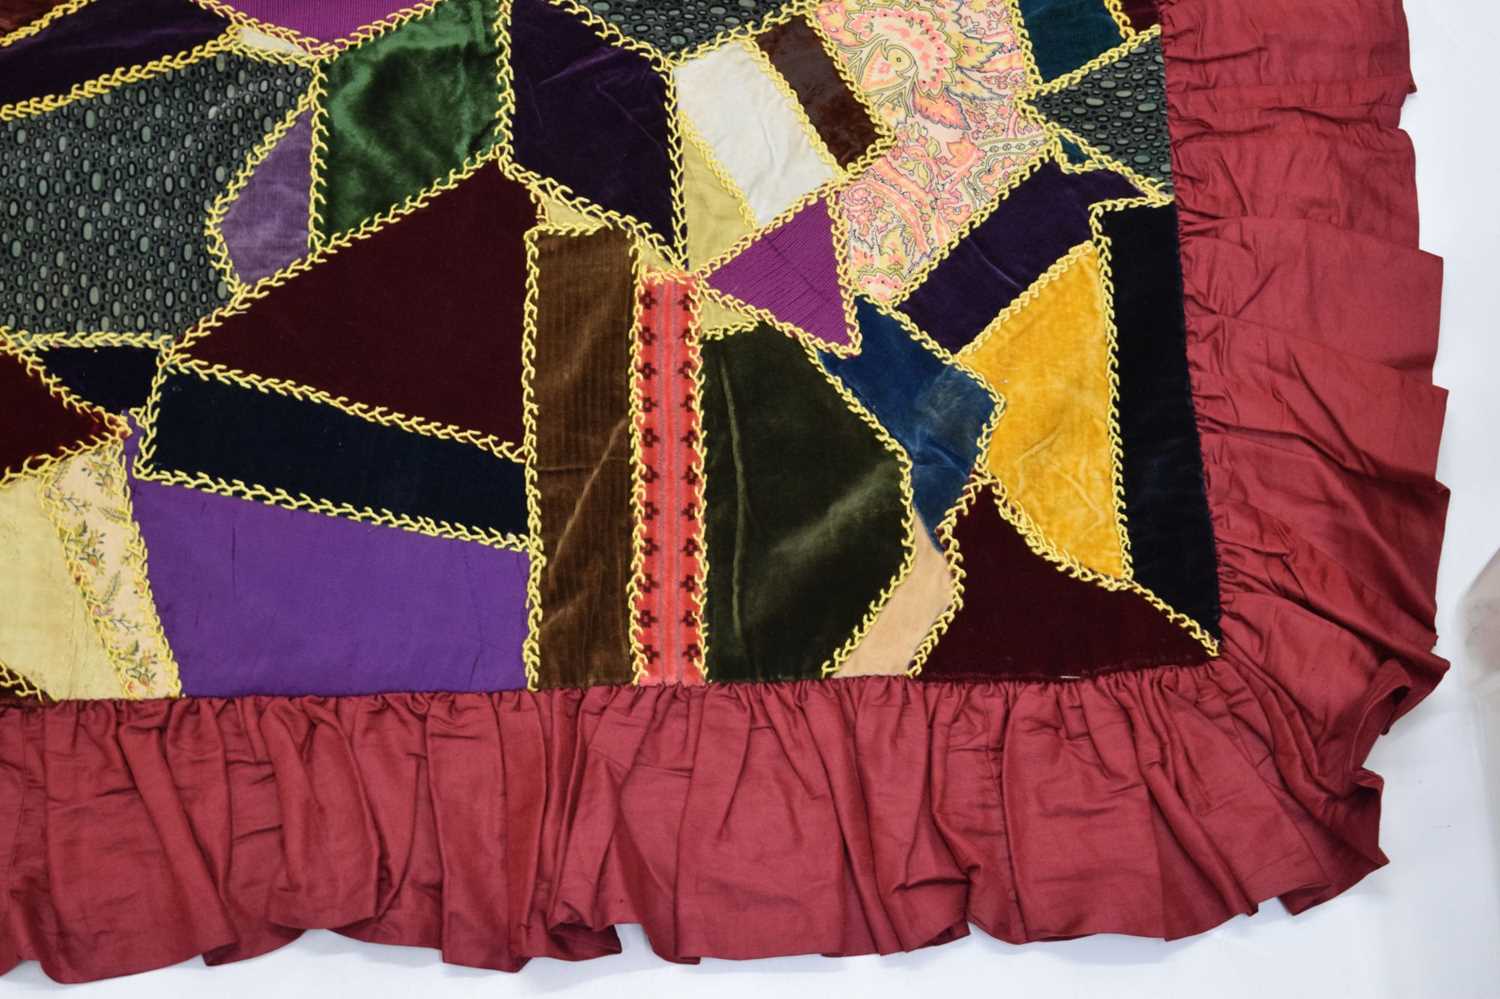 Late 19th/early 20th century patchwork quilt - Image 6 of 8